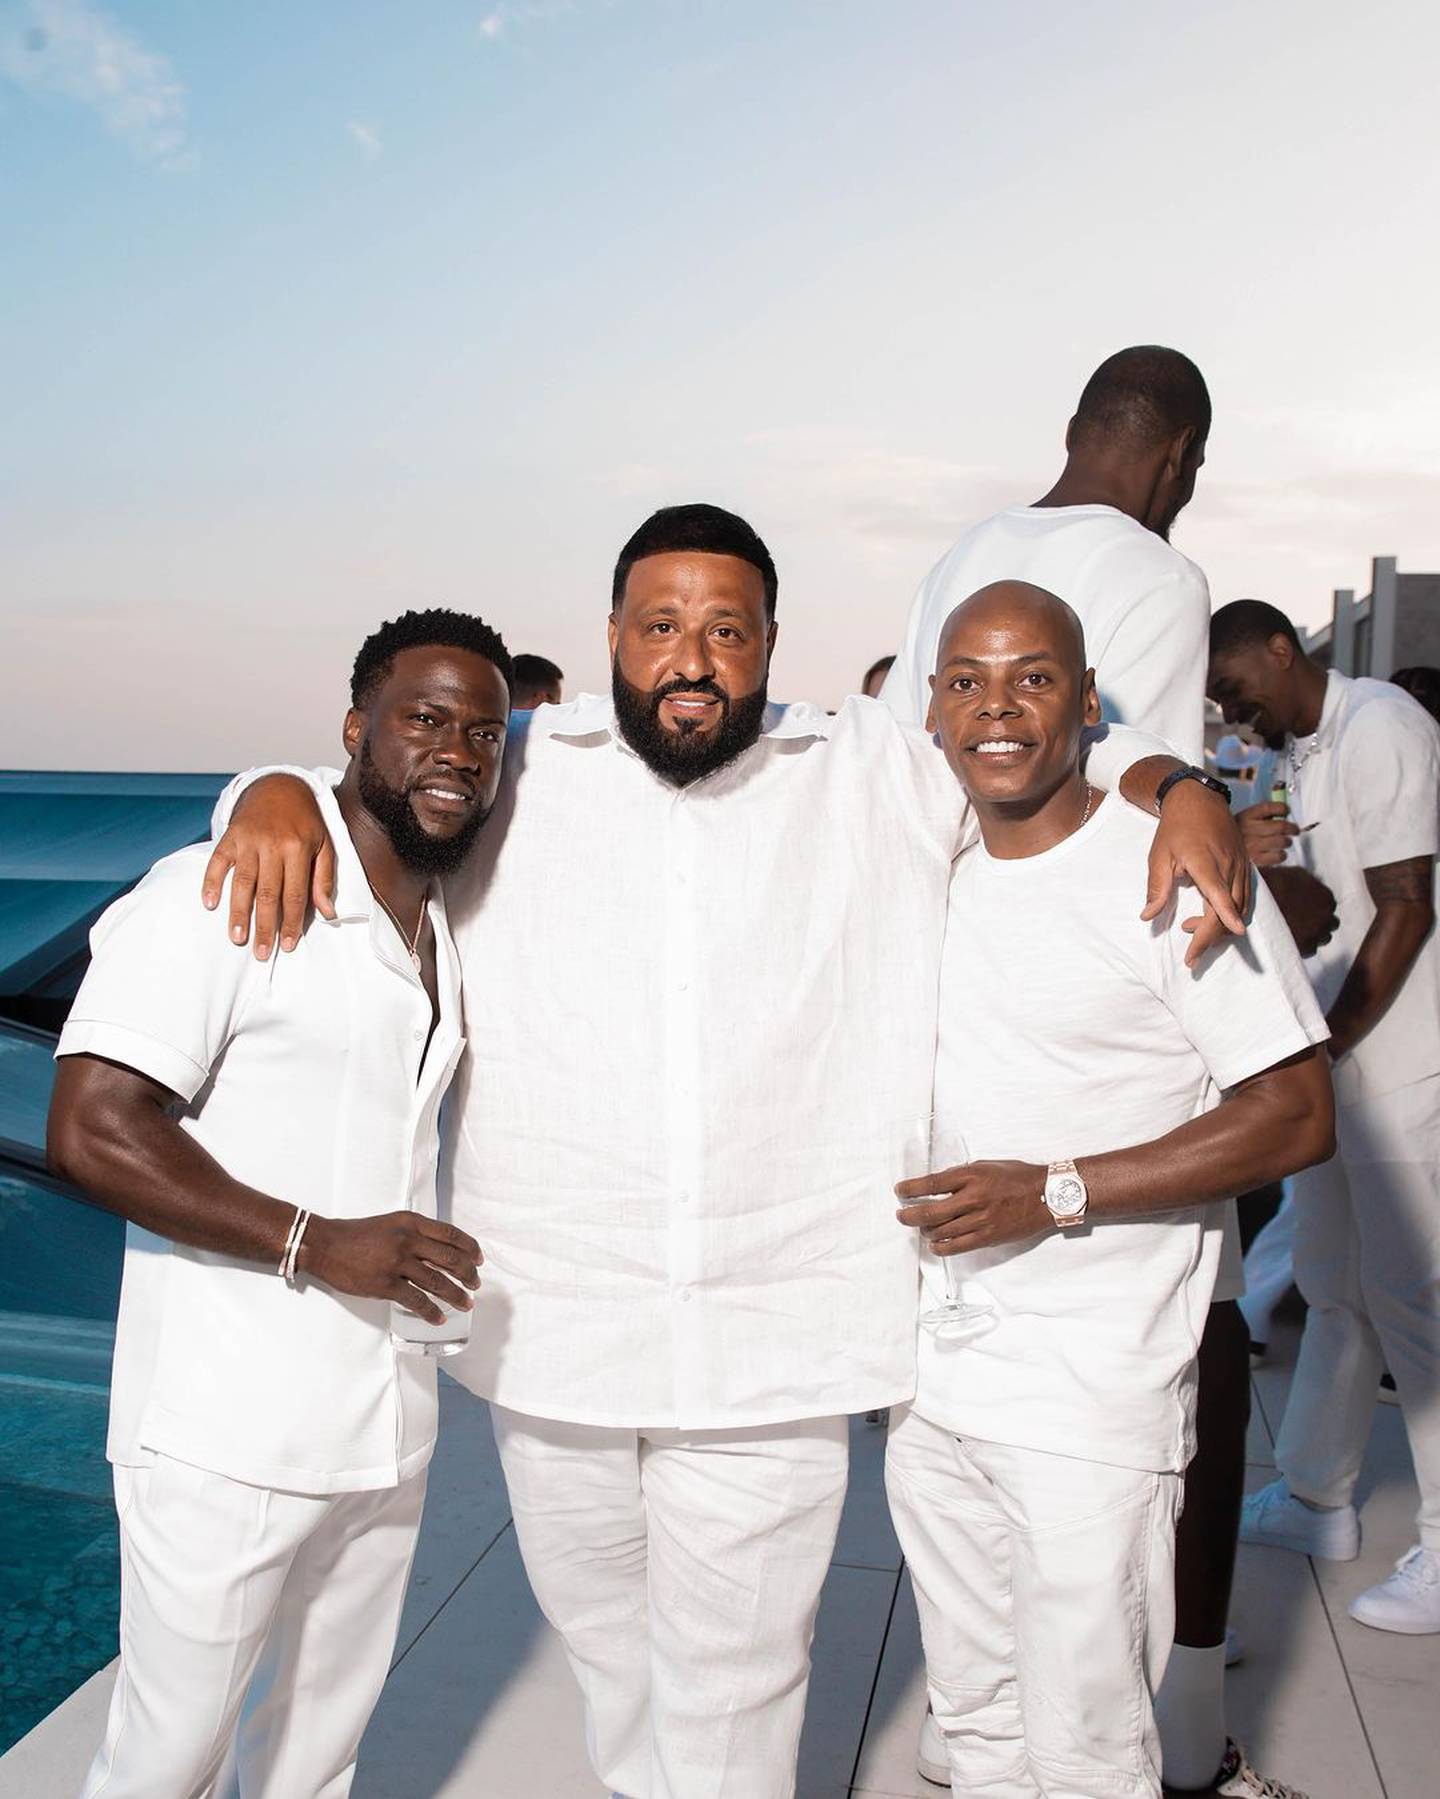 Actor Kevin Hart, musician DJ Khaled and more attend Fanatics CEO Michael Rubin’s July 4th White Party.